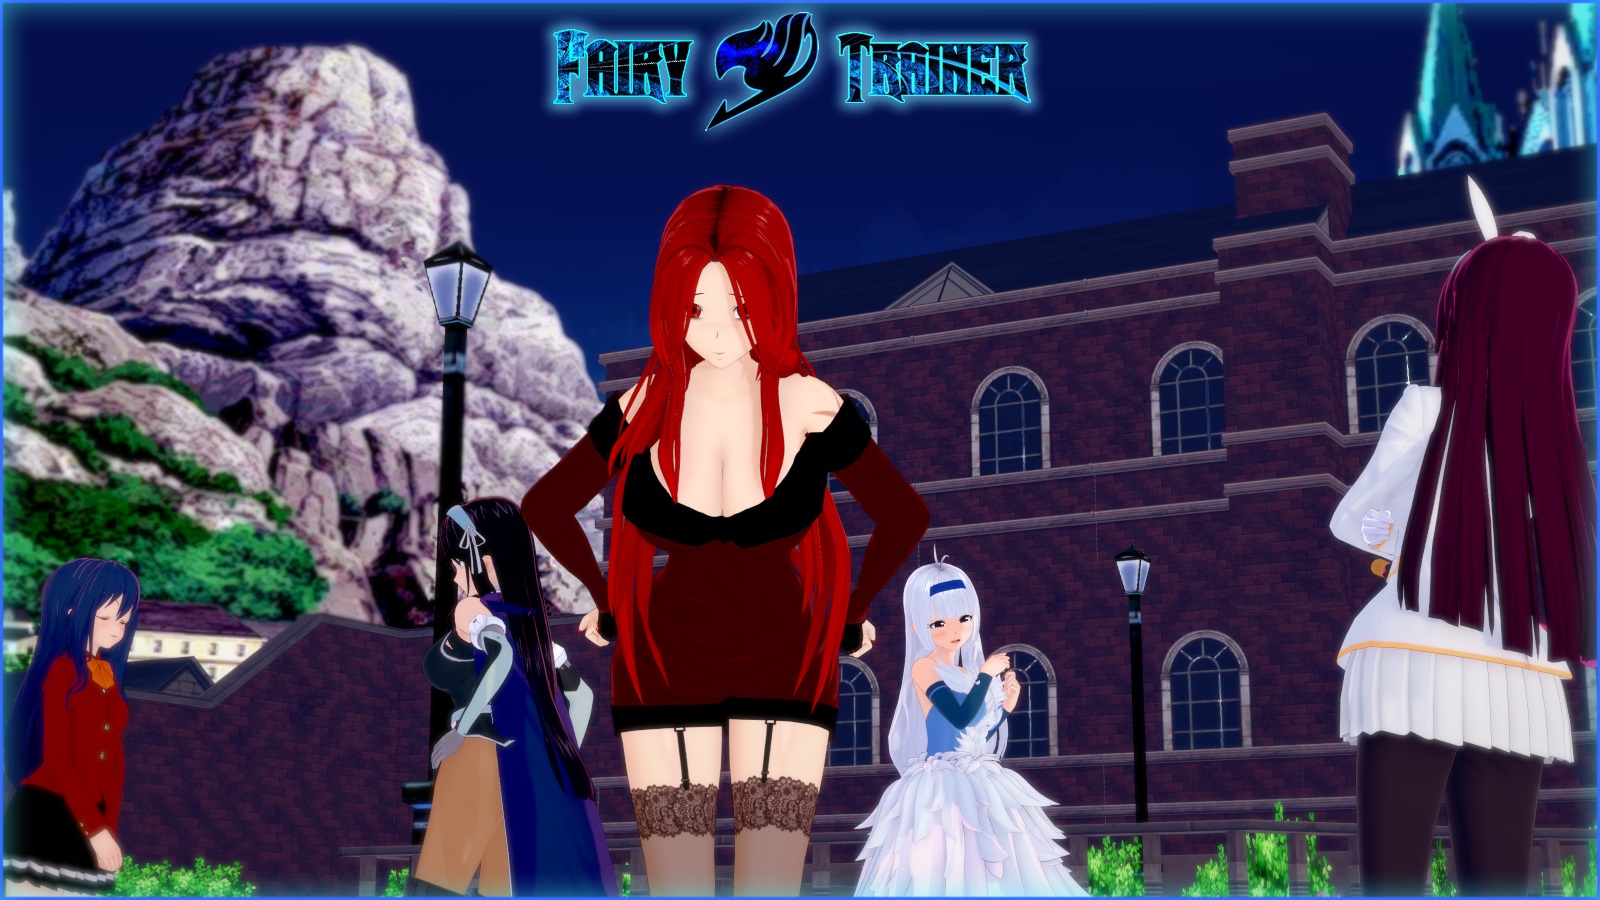 Fairy tail porn game